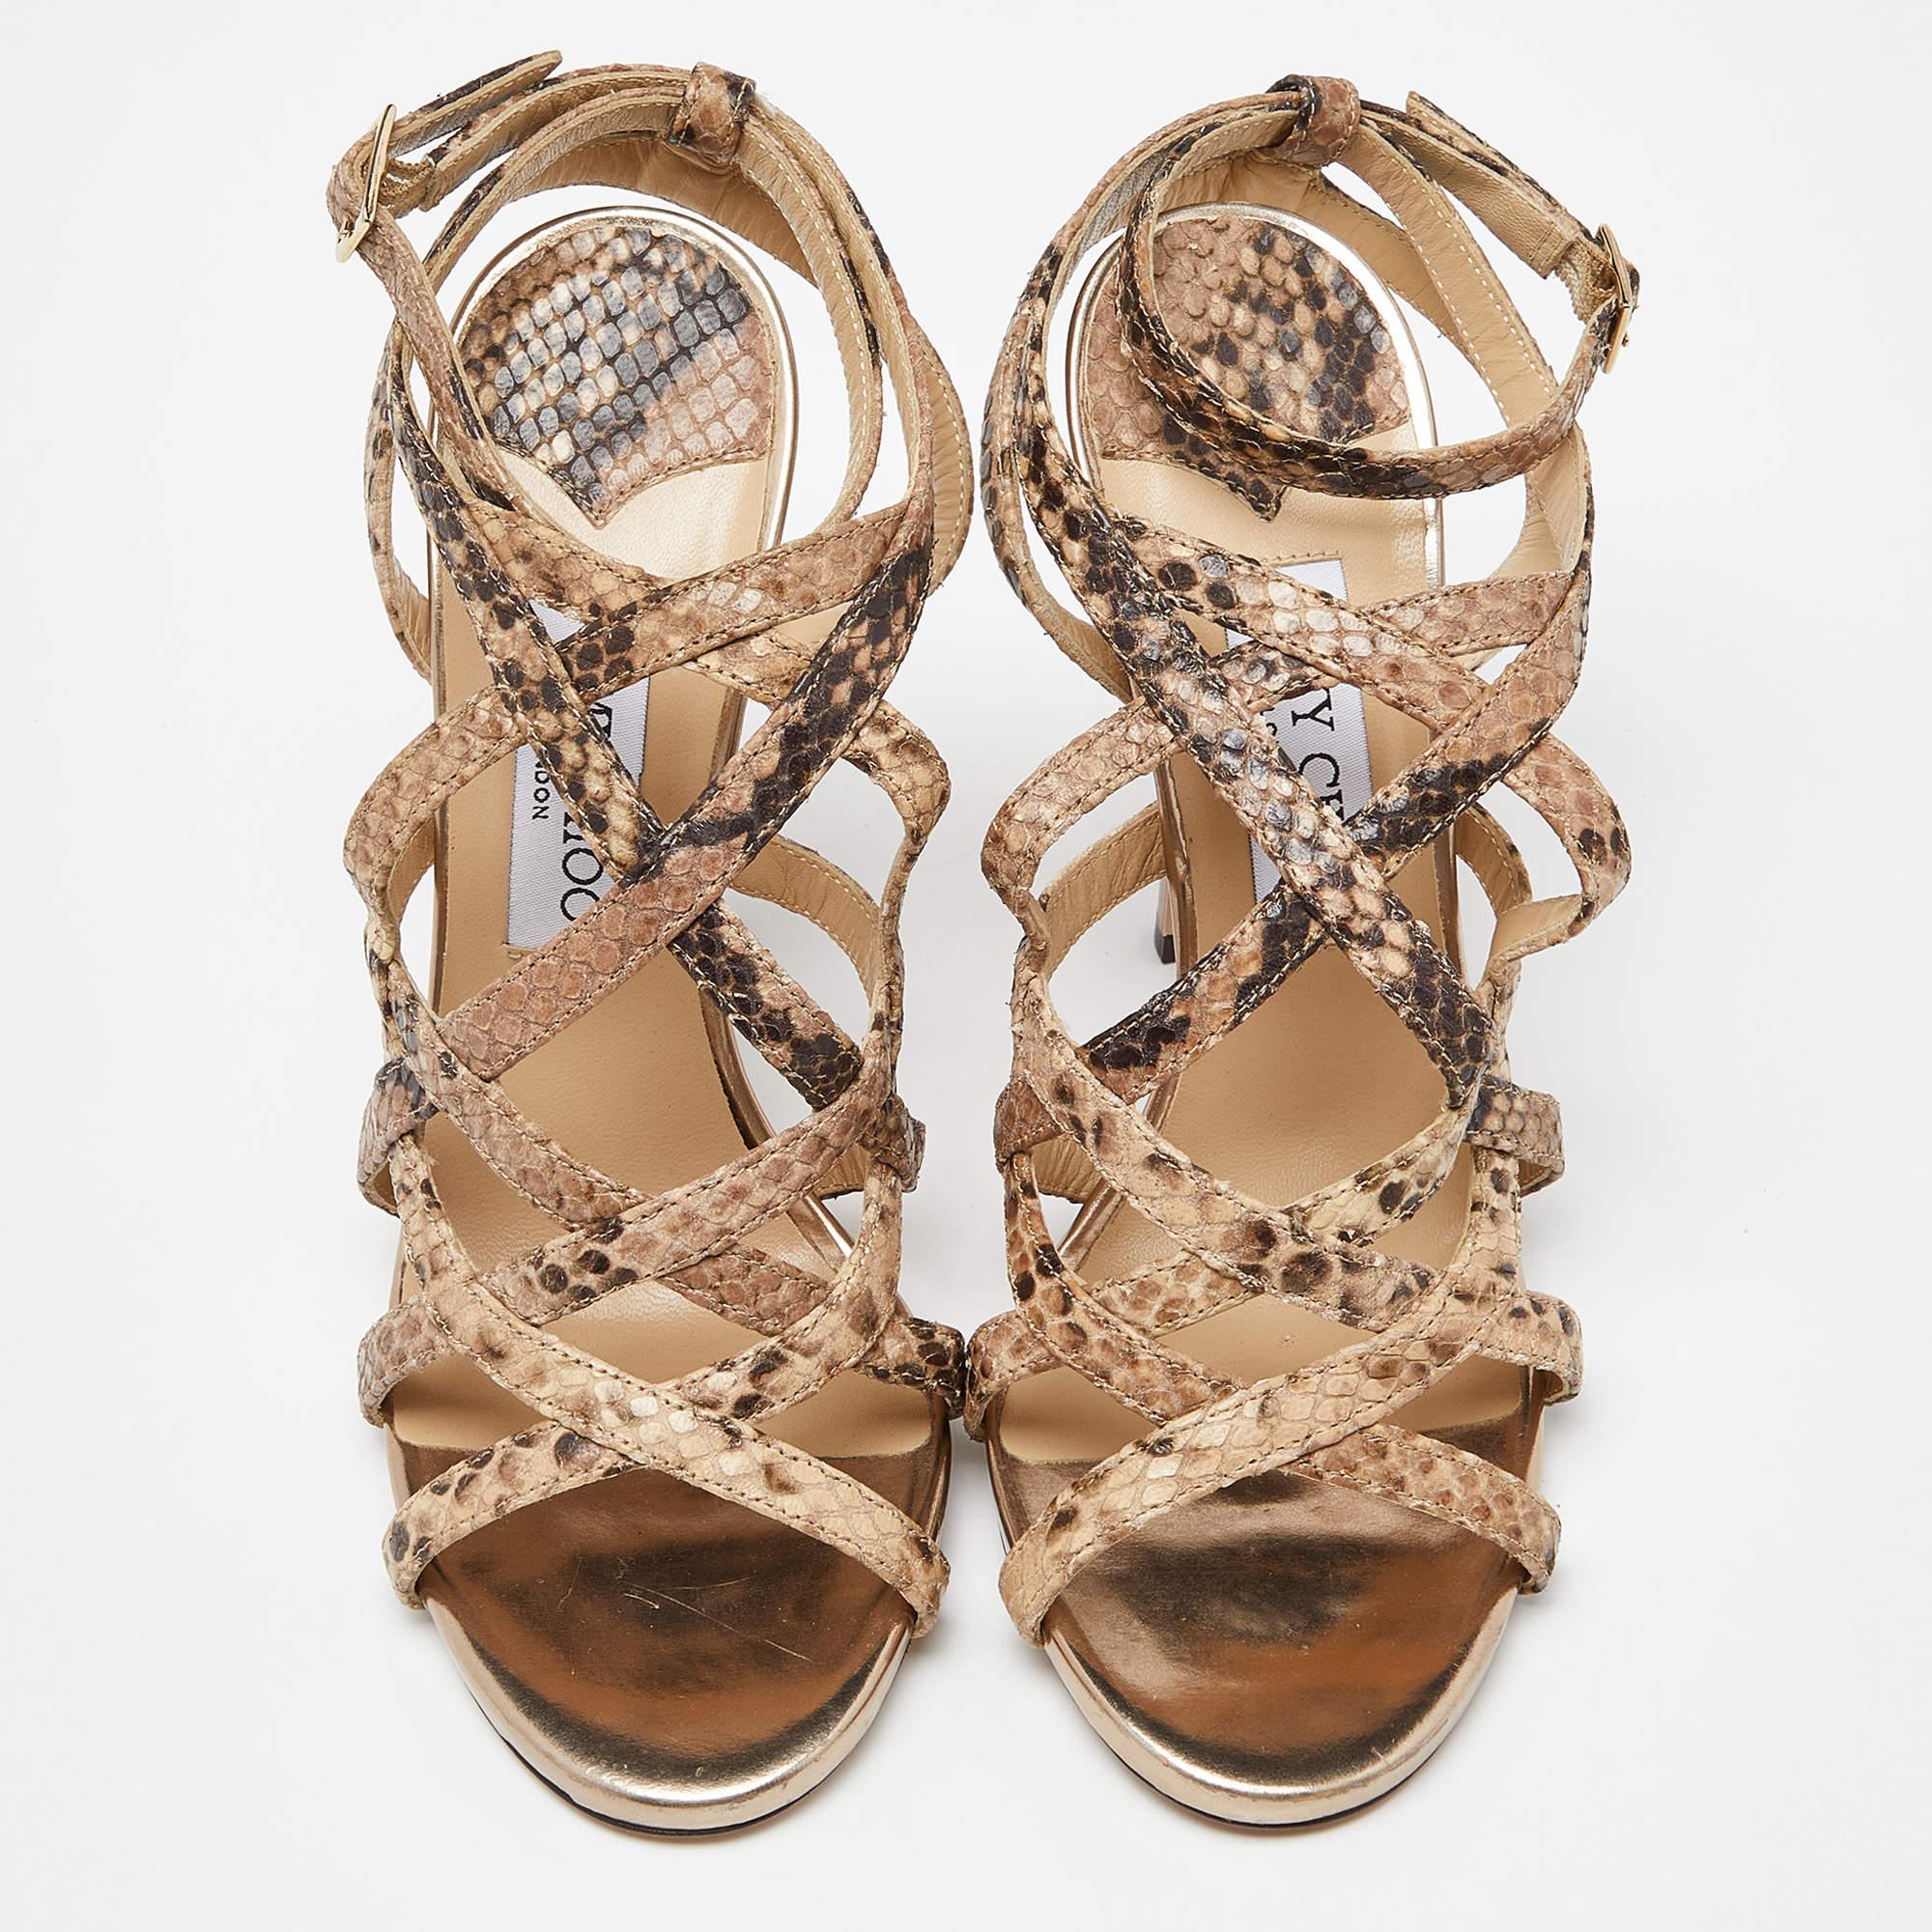 Jimmy Choo Beige Python Embossed Leather Ankle Strap Sandals Size 38 In Good Condition For Sale In Dubai, Al Qouz 2